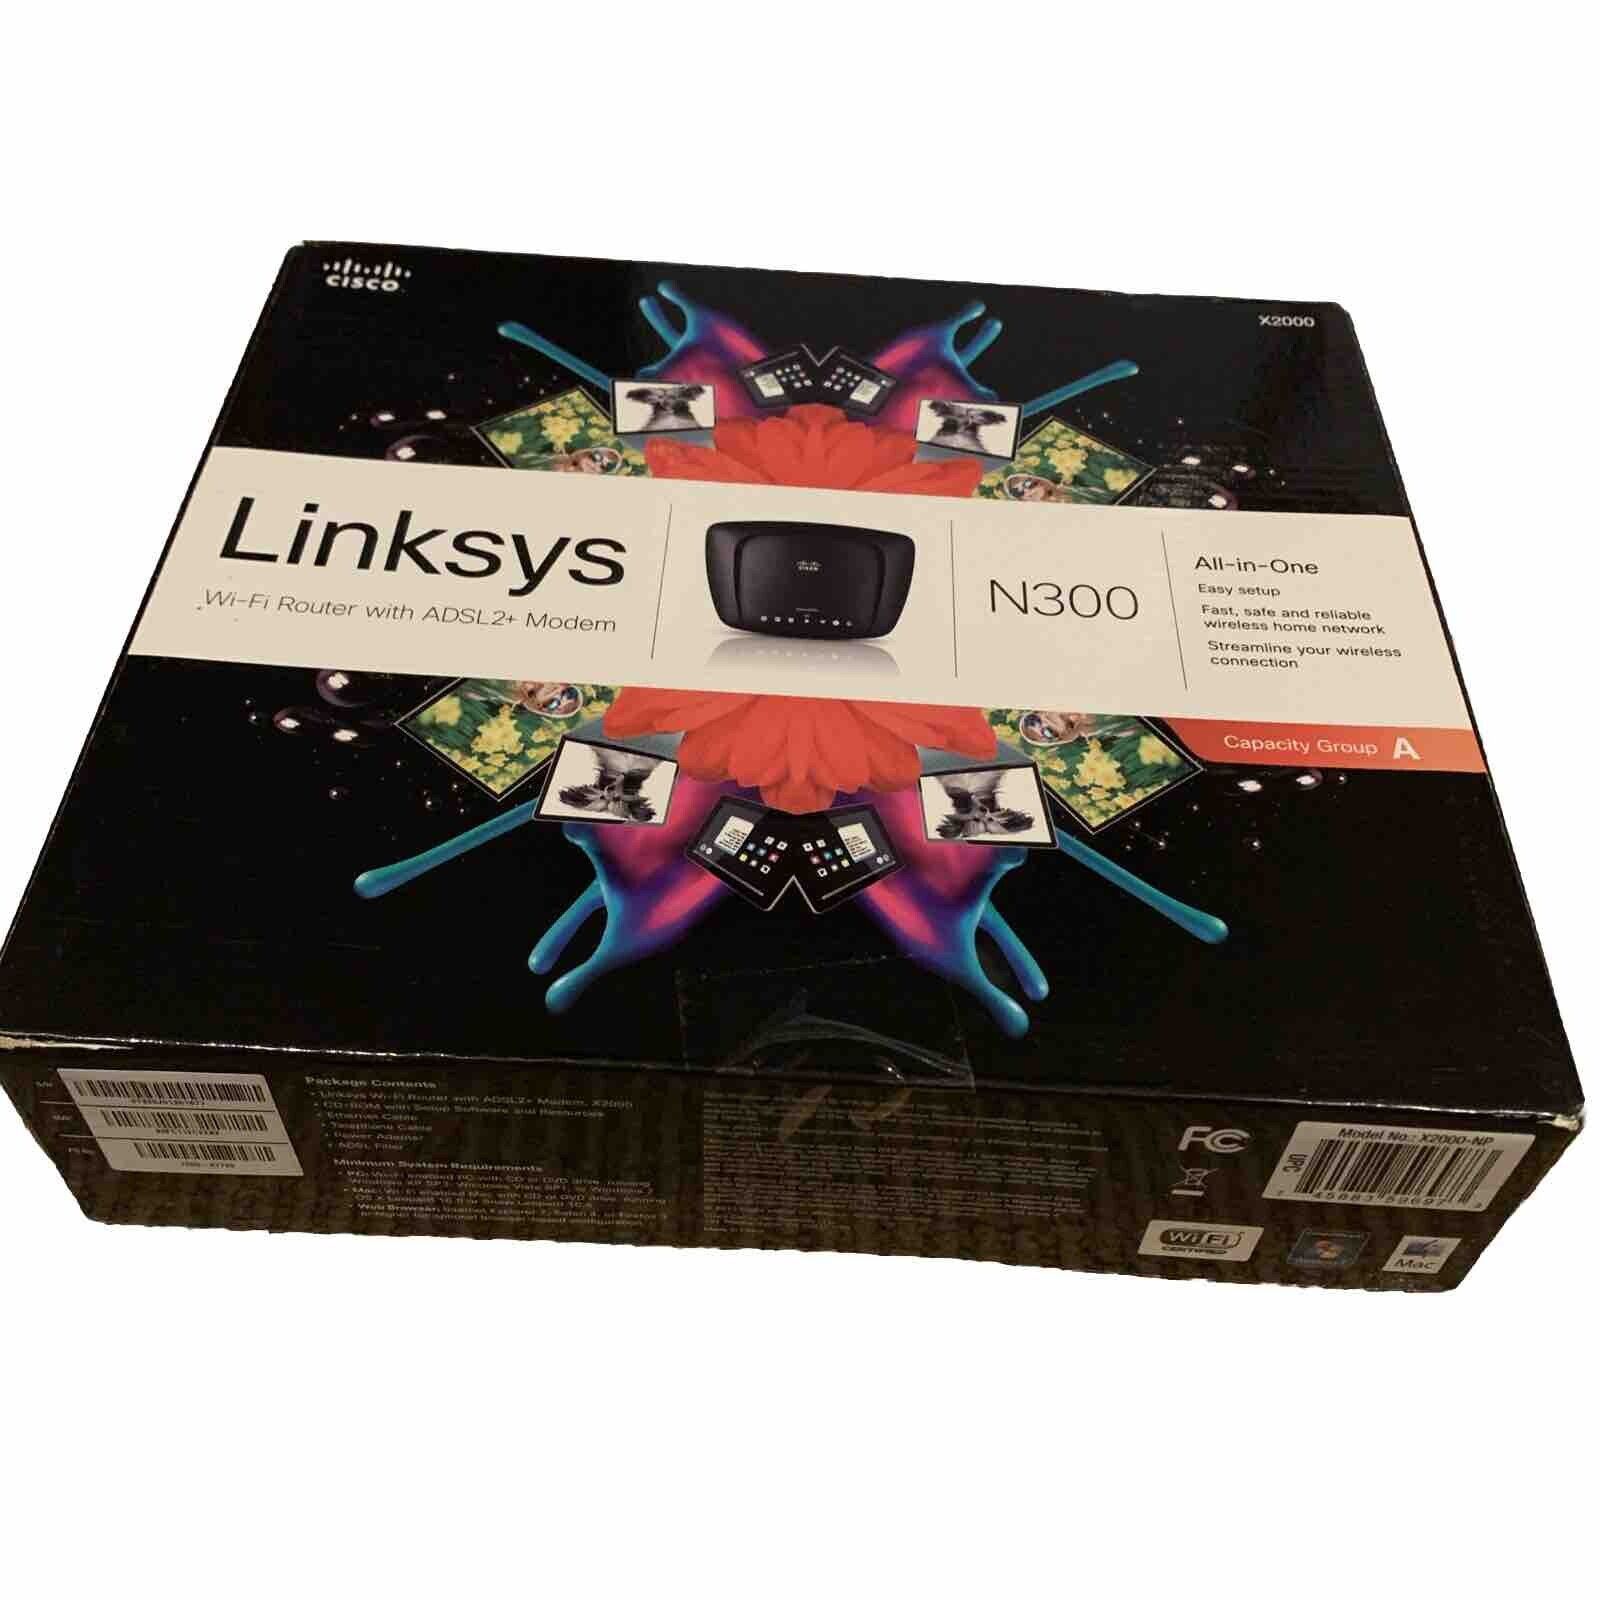 Linksys Wi-Fi Router N300 - Up to 300 Mbps speed New With Box